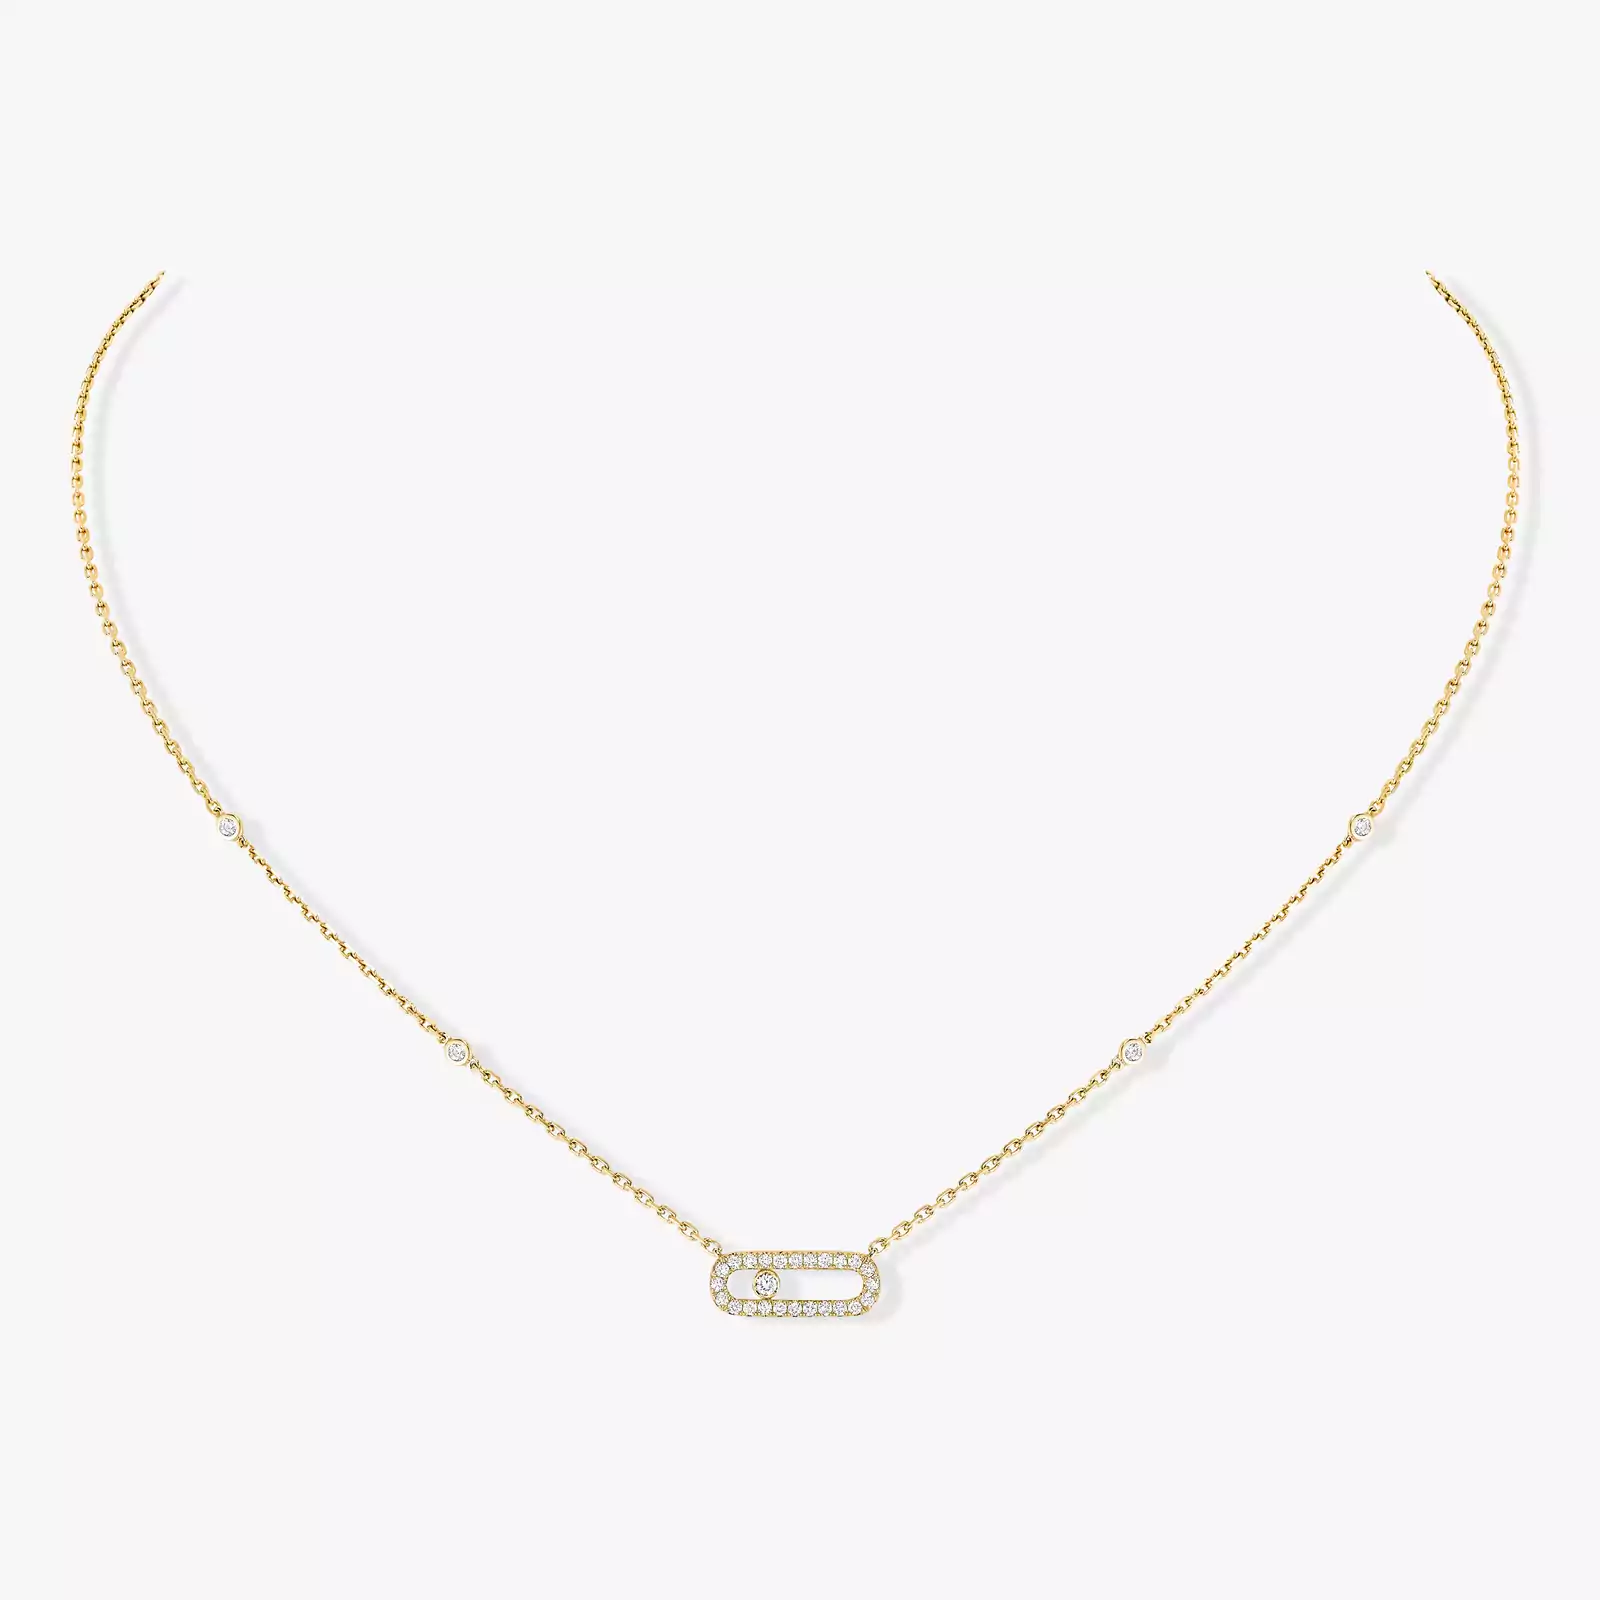 Move Uno Pavé Yellow Gold For Her Diamond Necklace 04708-YG